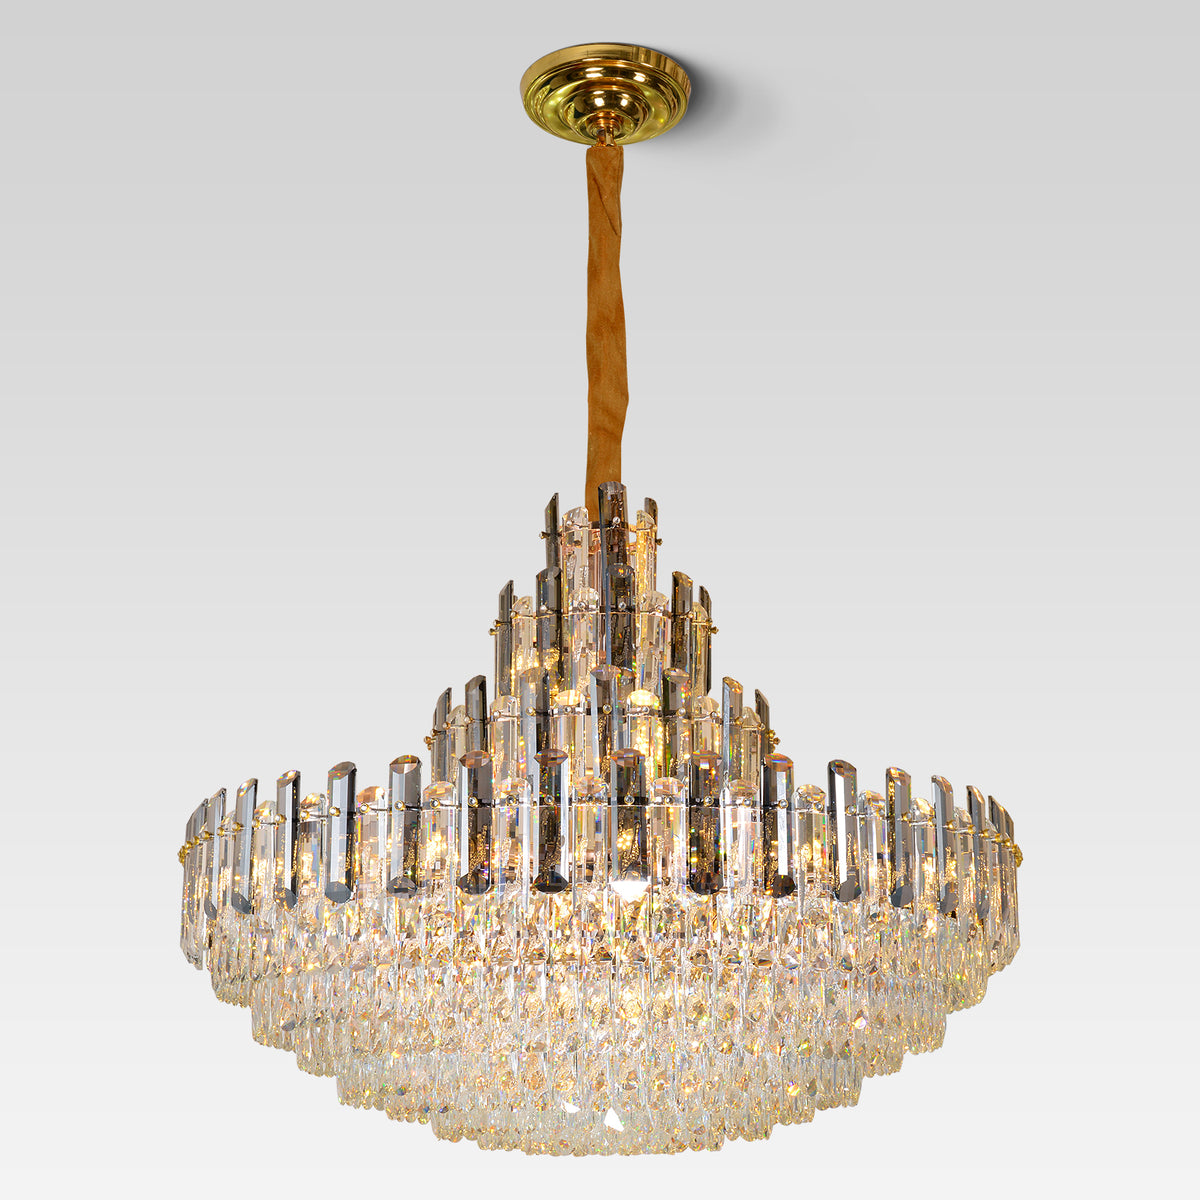 Lightingsea American Style Chandelier With Crystal Glass Shade For Living Room,Dining Room, Kitchen,Bedroom